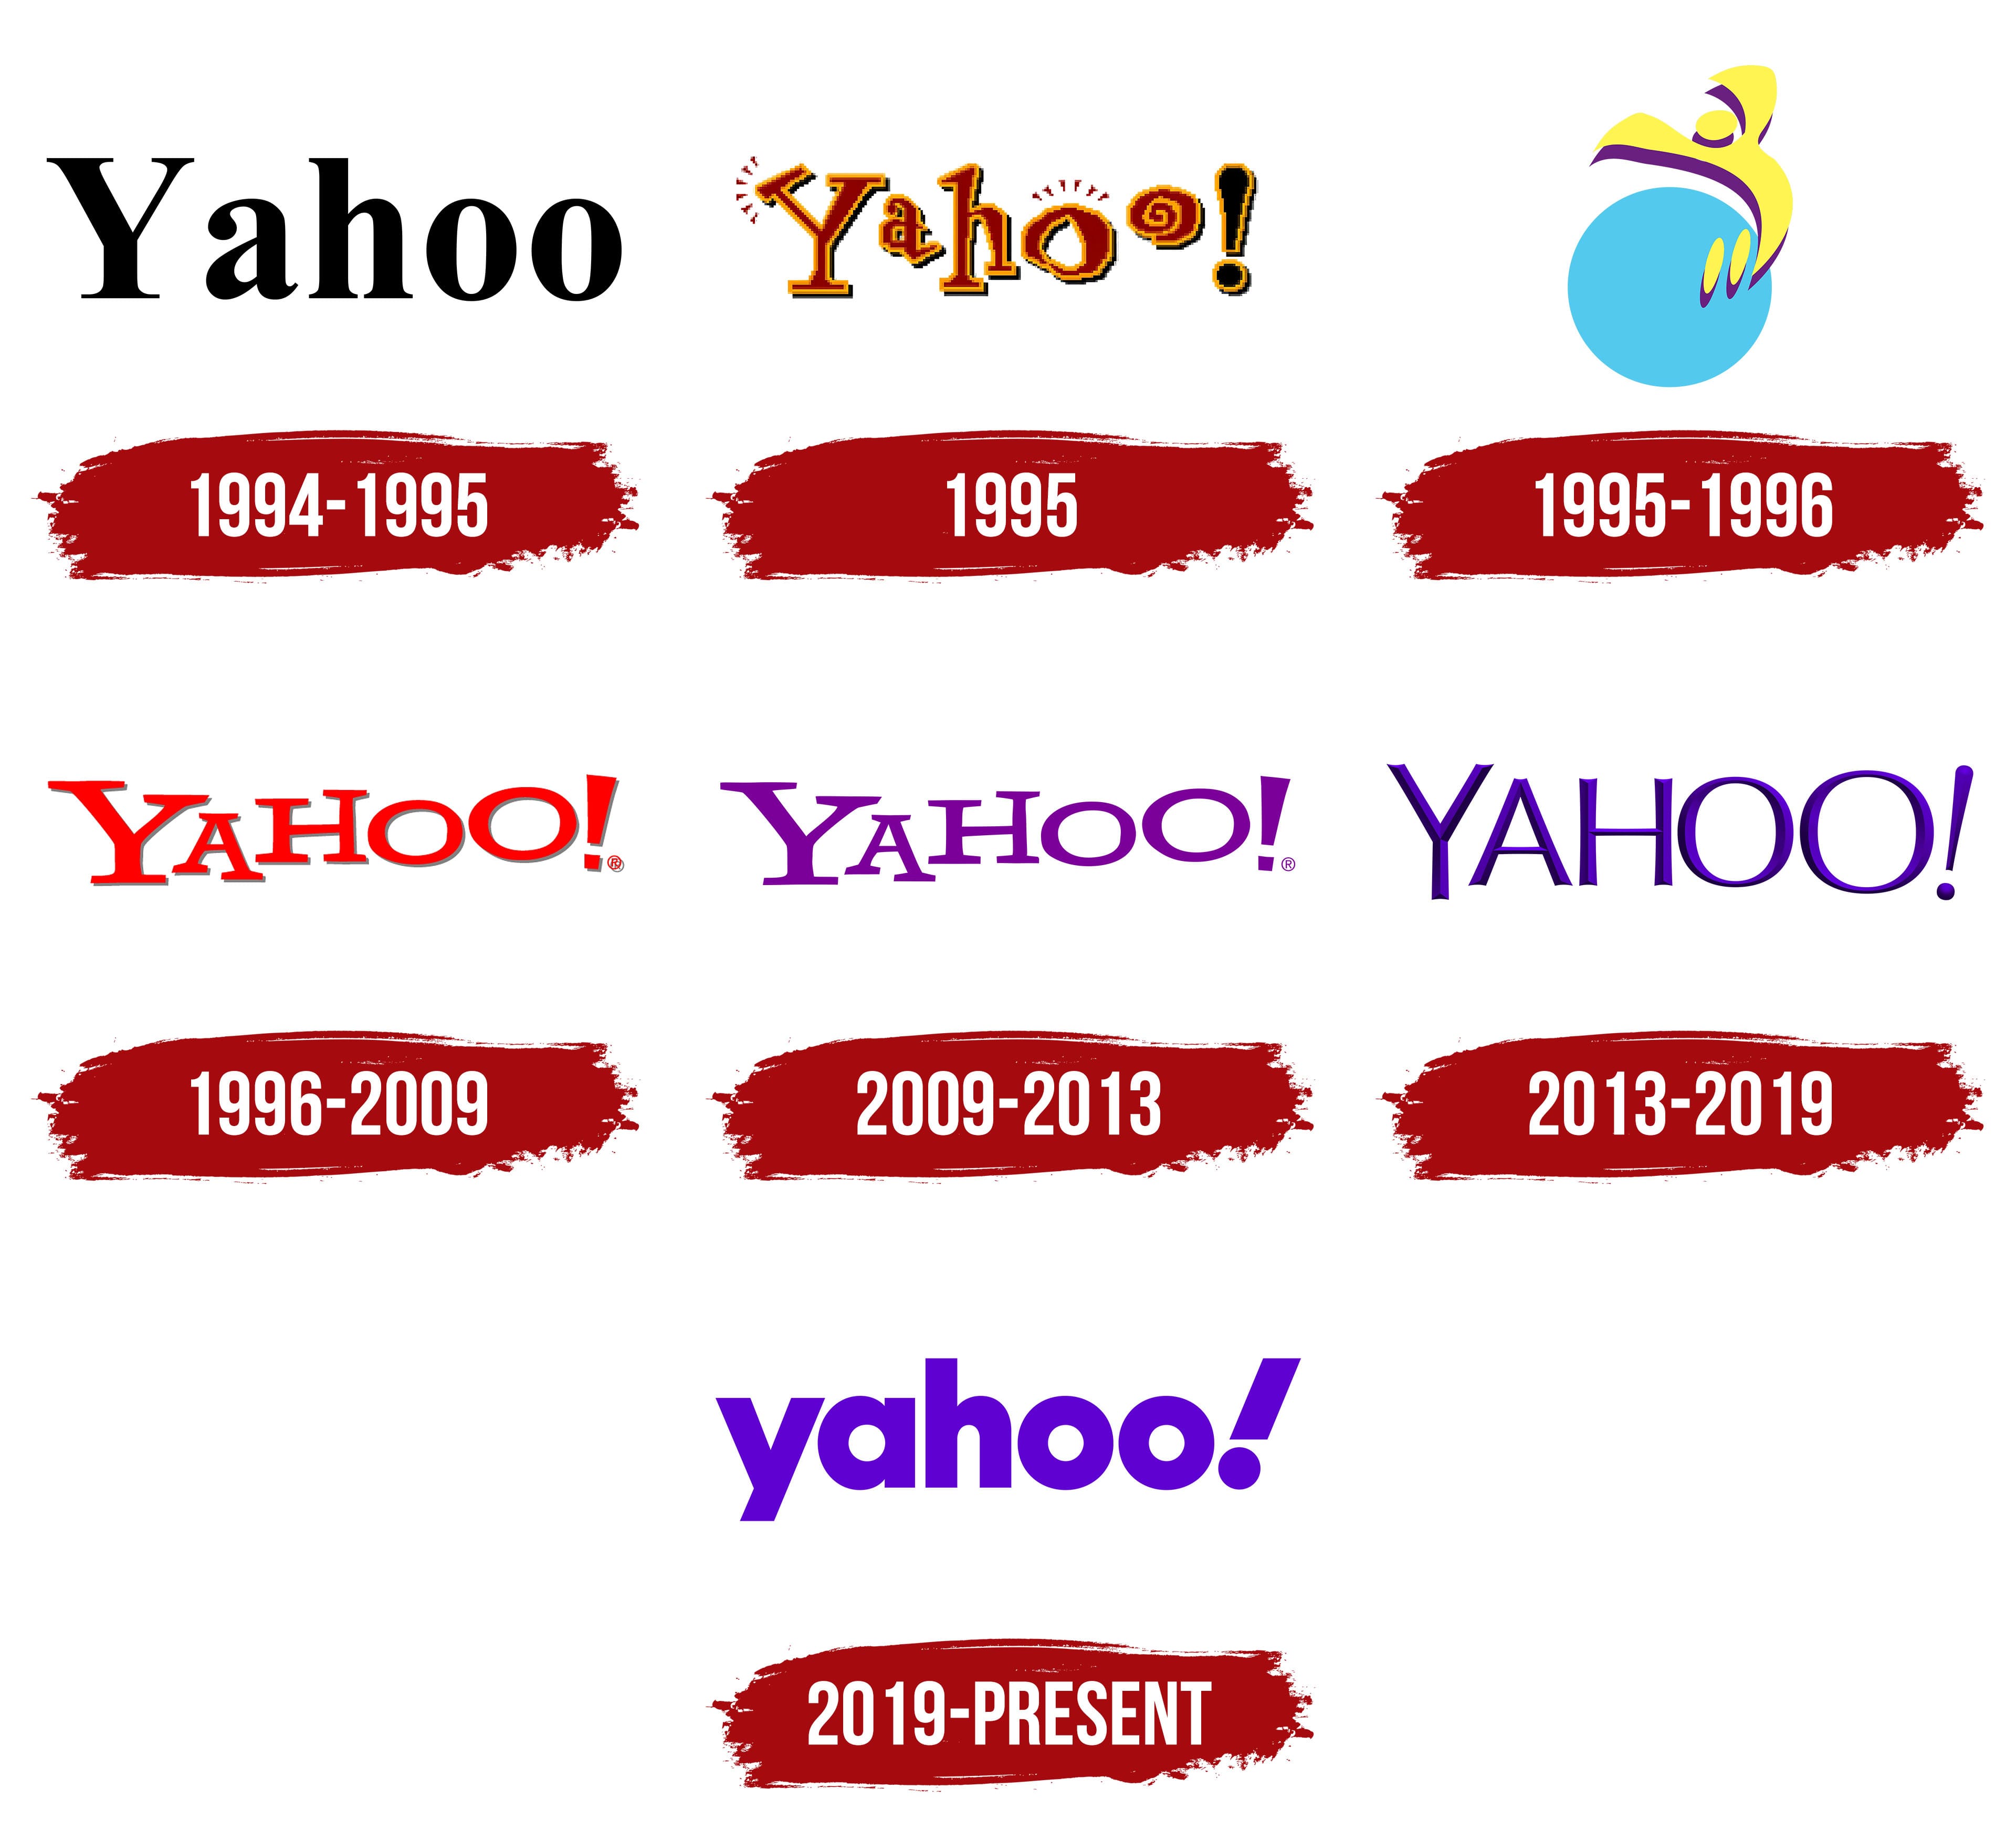 Snapchat Logo Design – History, Meaning and Evolution